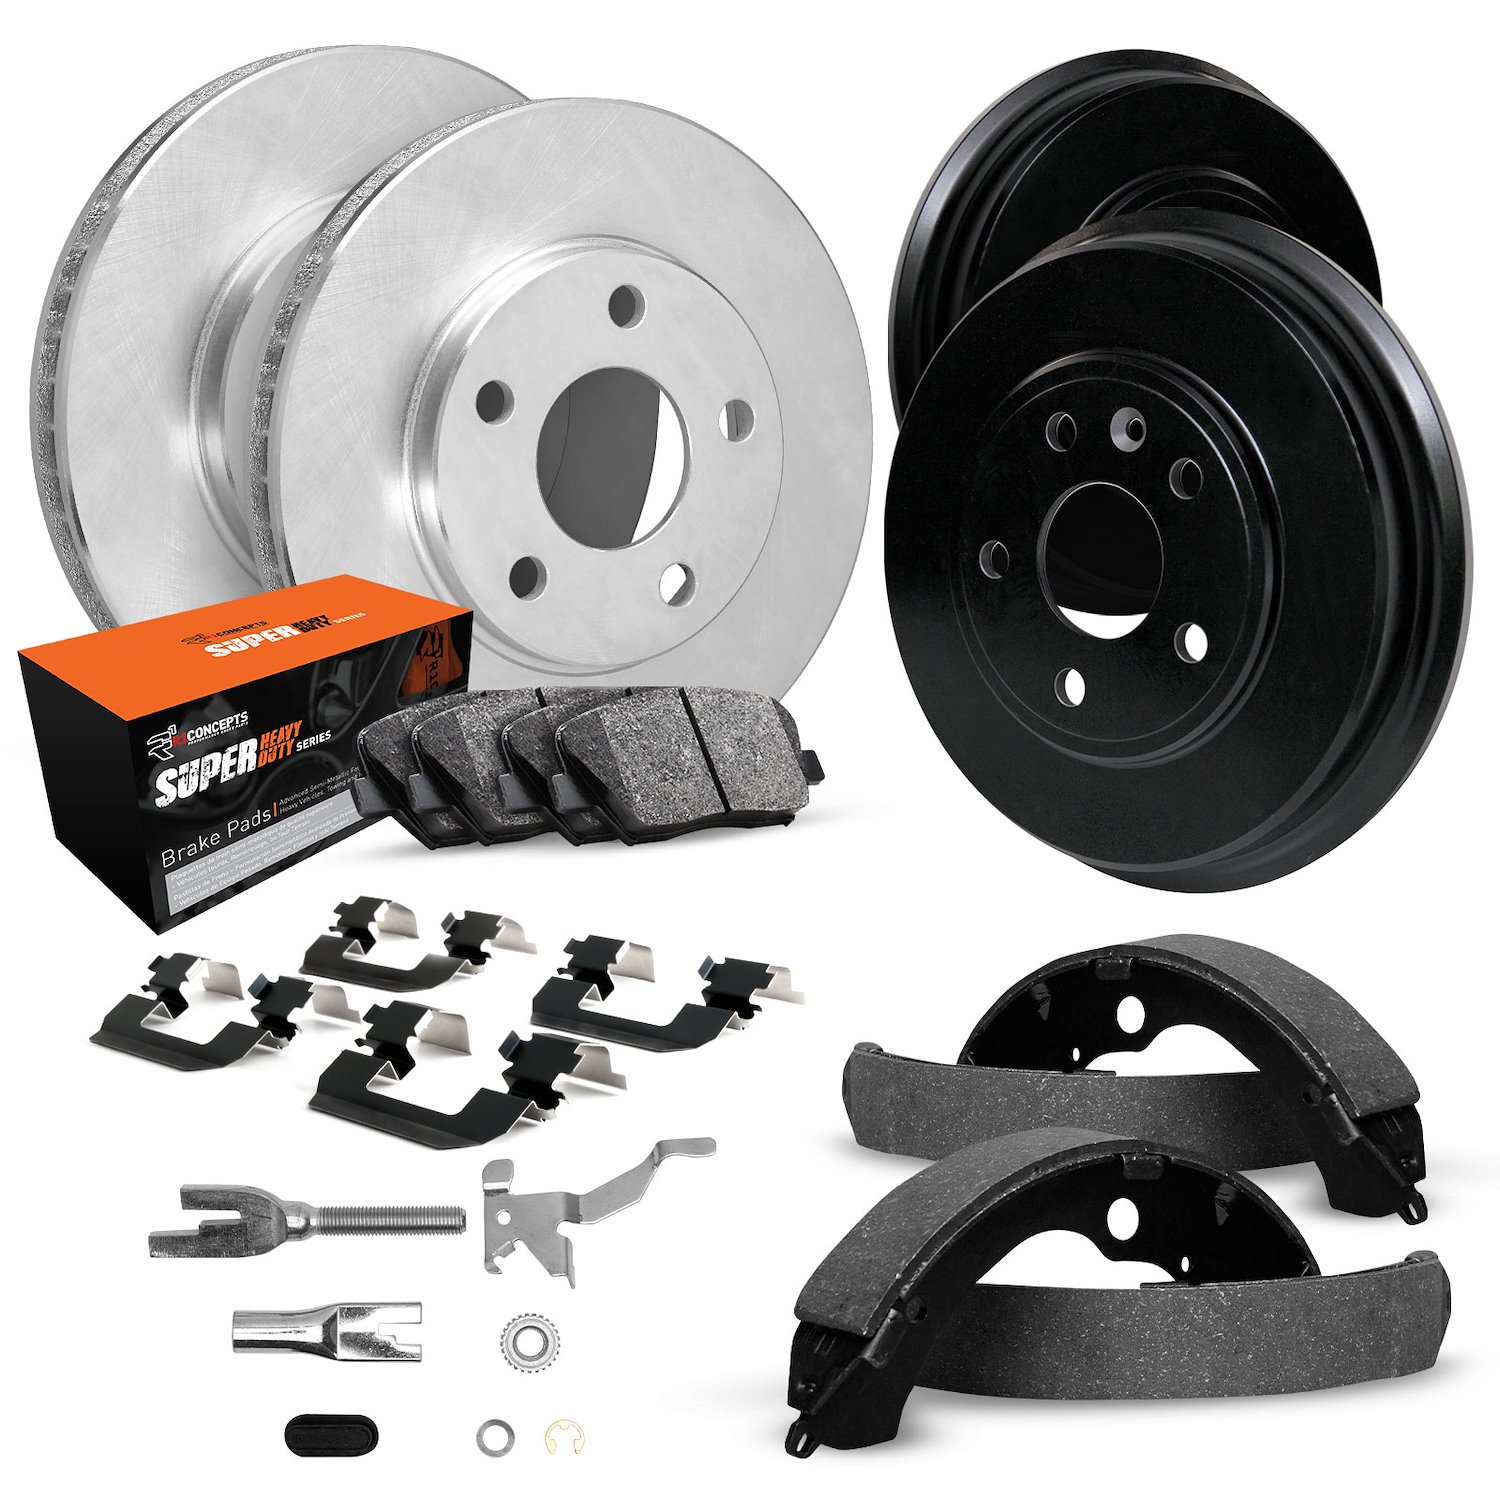 E-Line Blank Brake Rotor & Drum Set w/Super-Duty Pads, Shoes, Hardware, & Adjusters, 2007-2007 GM, Position: Front & Rear